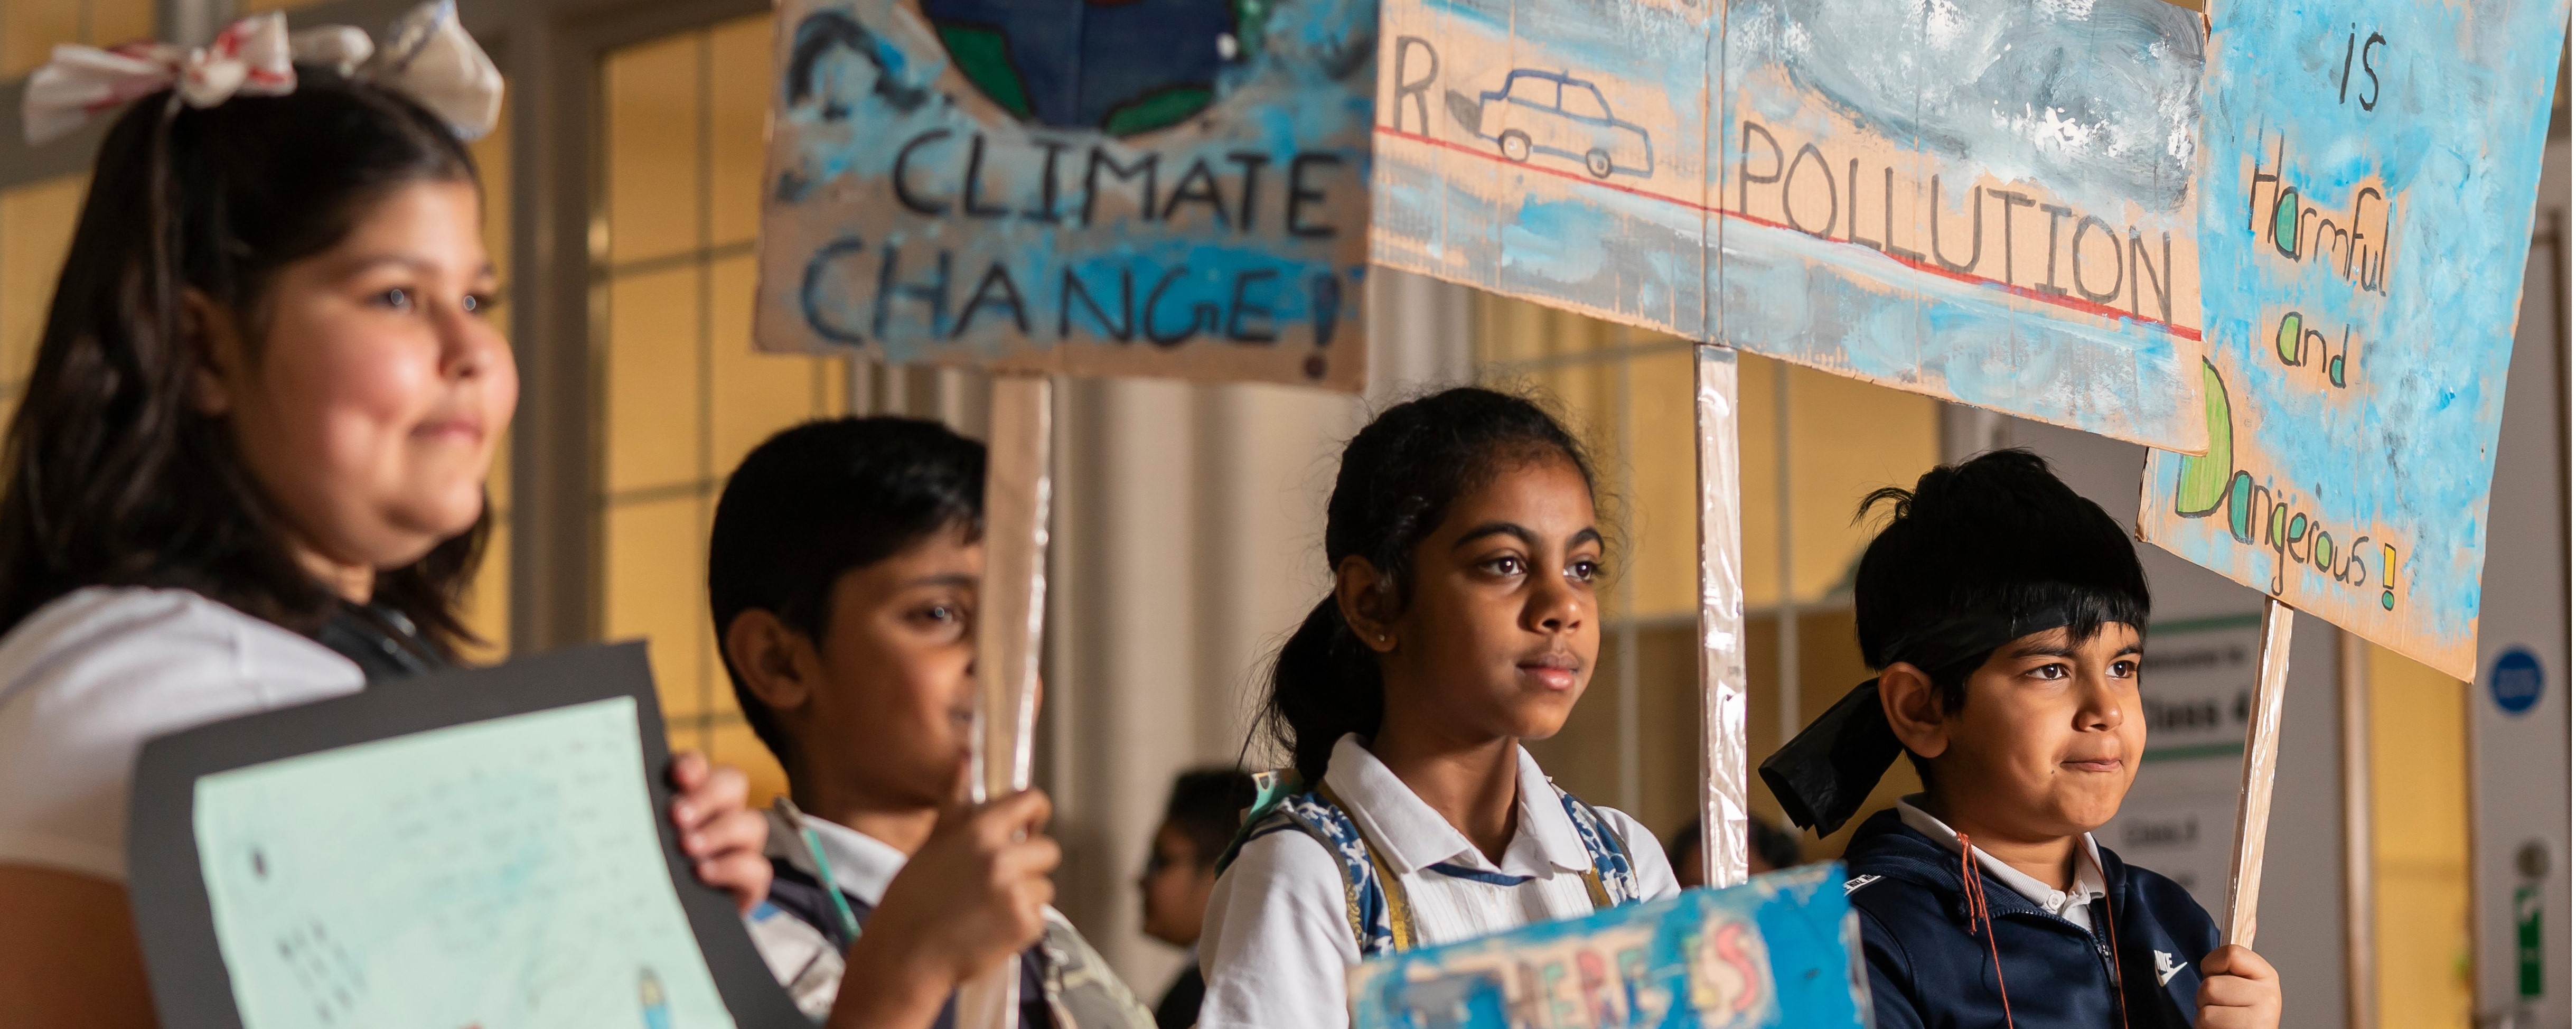 School children in Newham protest against climate change